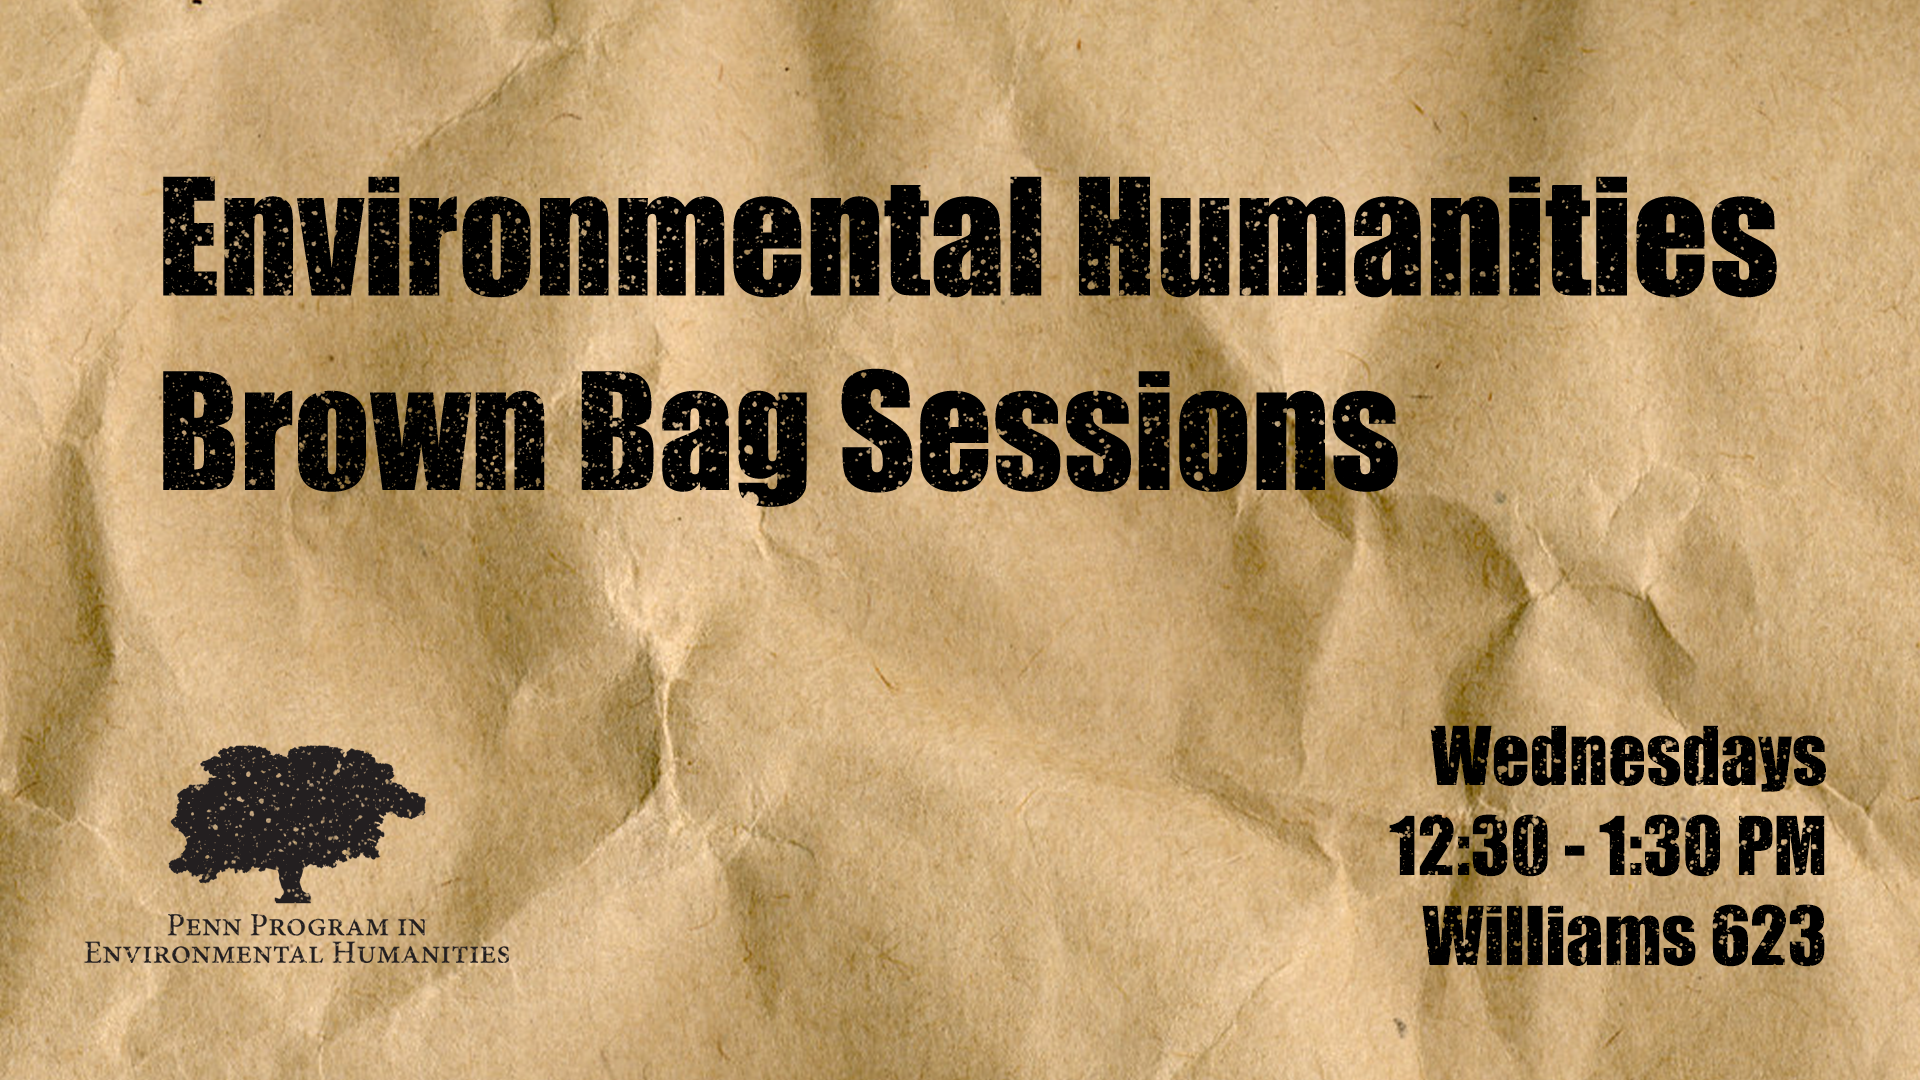 "Environmental Humanities Brown Bag Session" written on a brown bag texture.